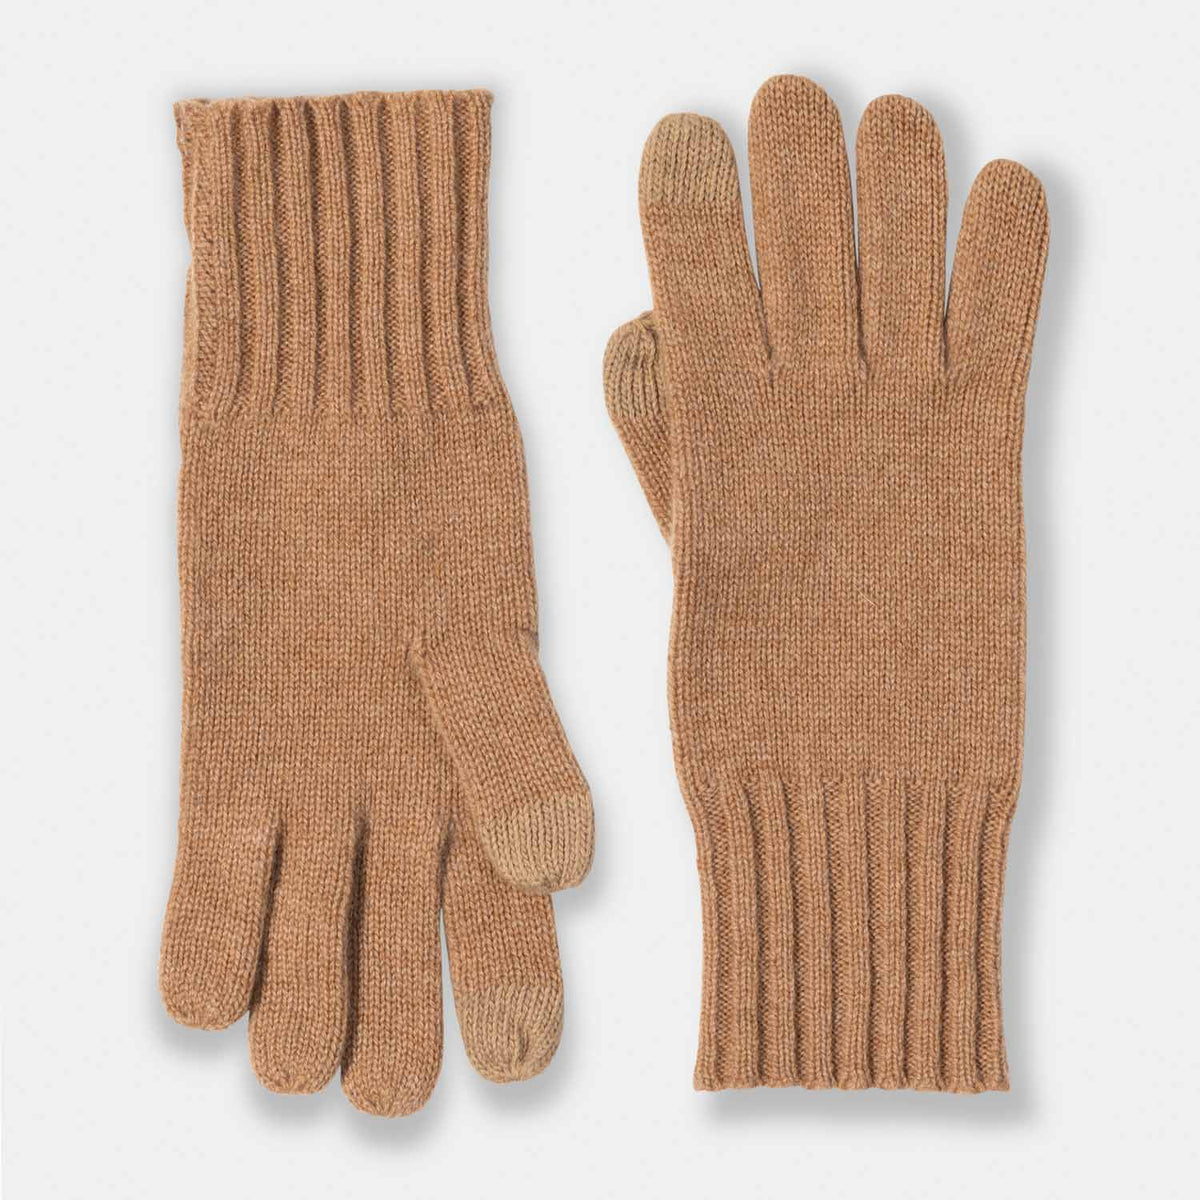 Picture of knit cashmere gloves with touch tech finger tips and rib cuff, camel.